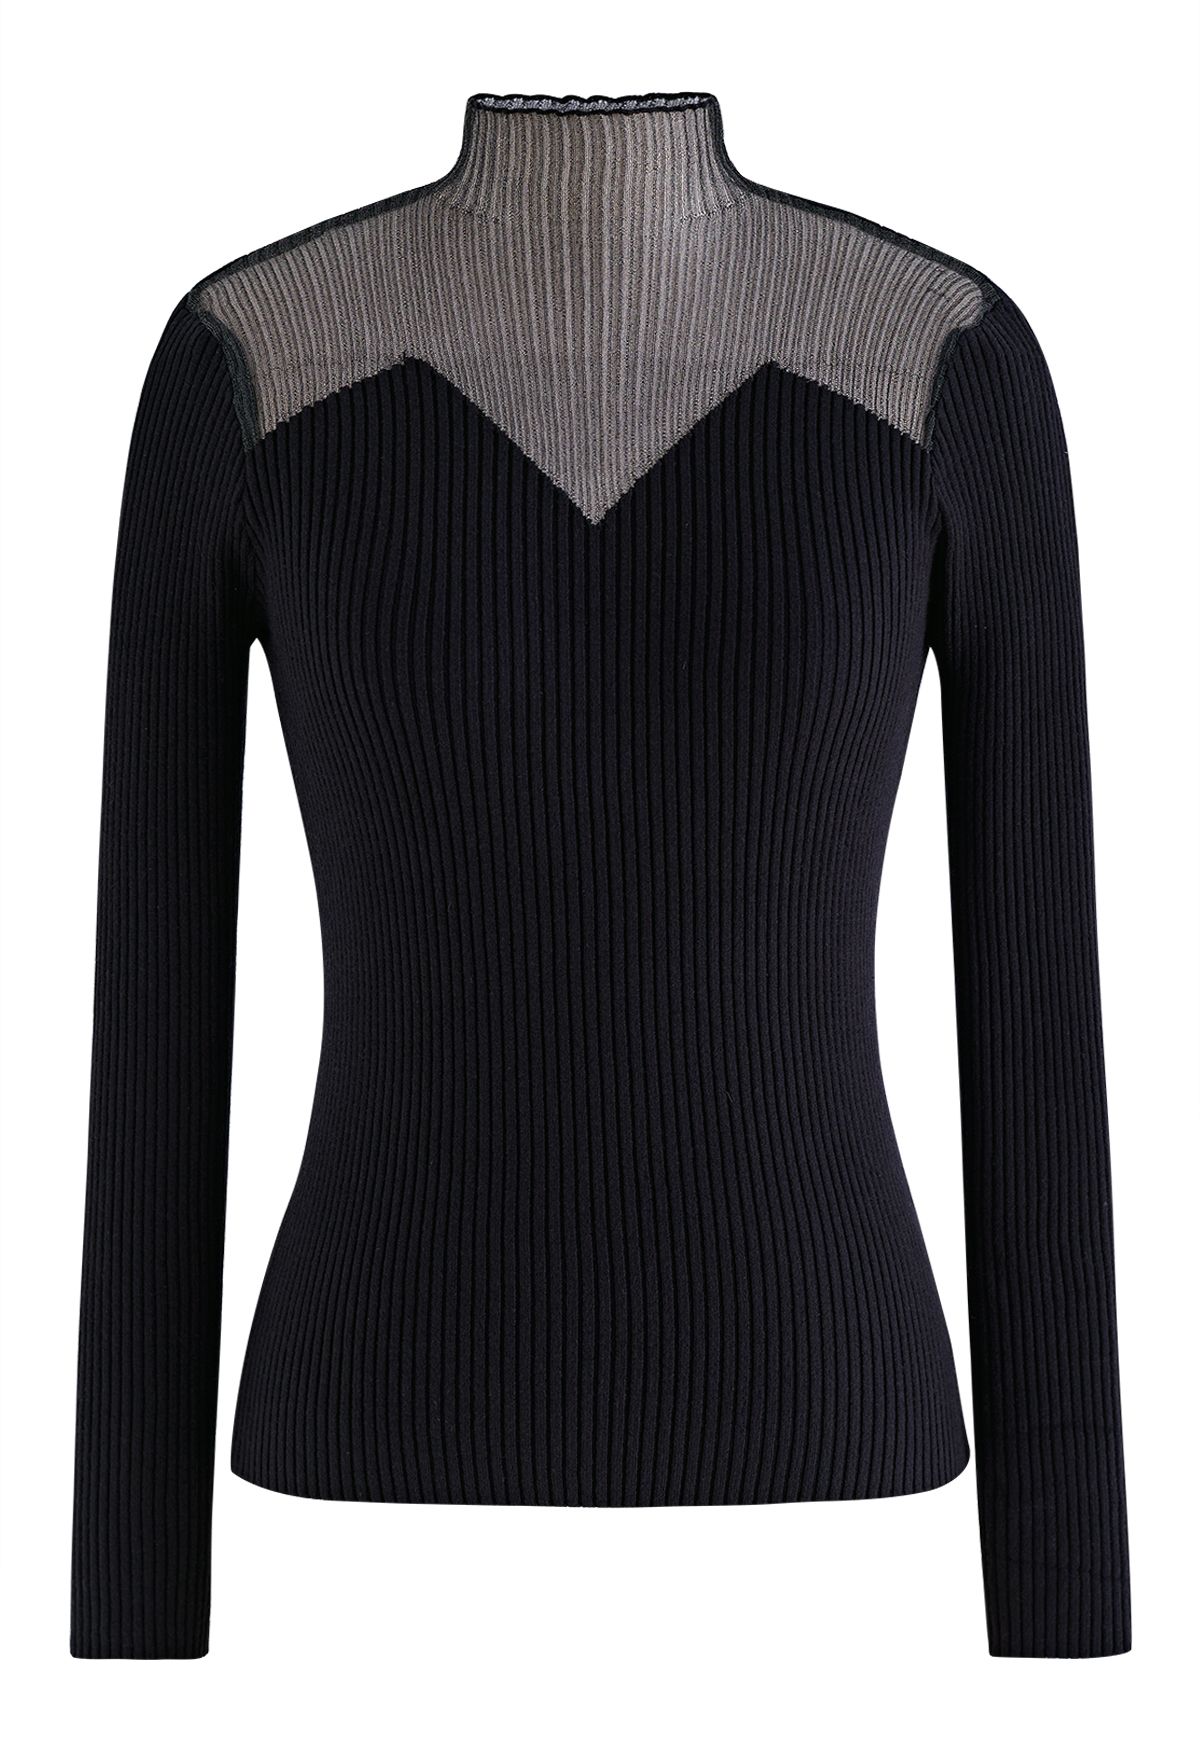 Mock Neck Zigzag Mesh Splicing Knit Top in Black - Retro, Indie and ...